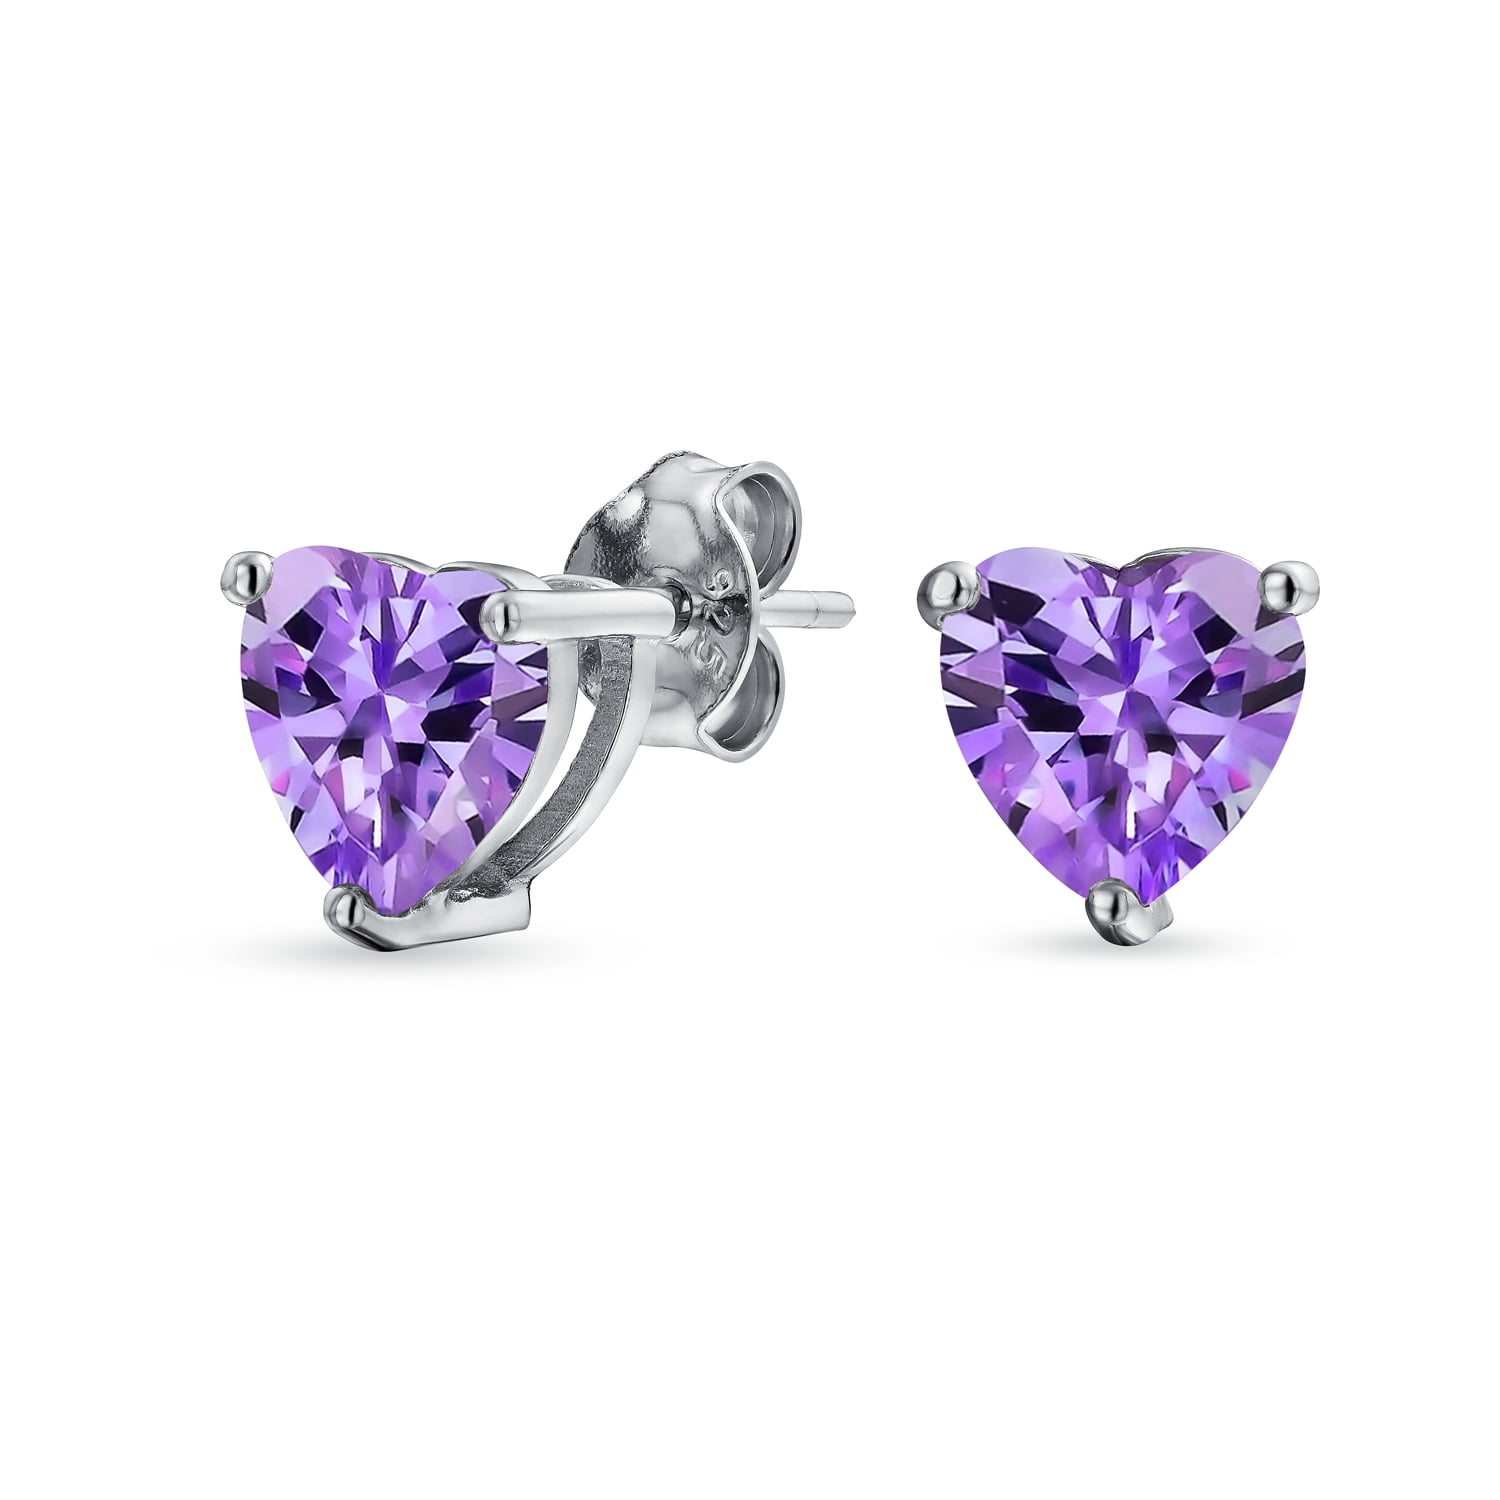 Sterling Silver Polished Simulated Amethyst Round Post Earrings 7mm x 7mm 